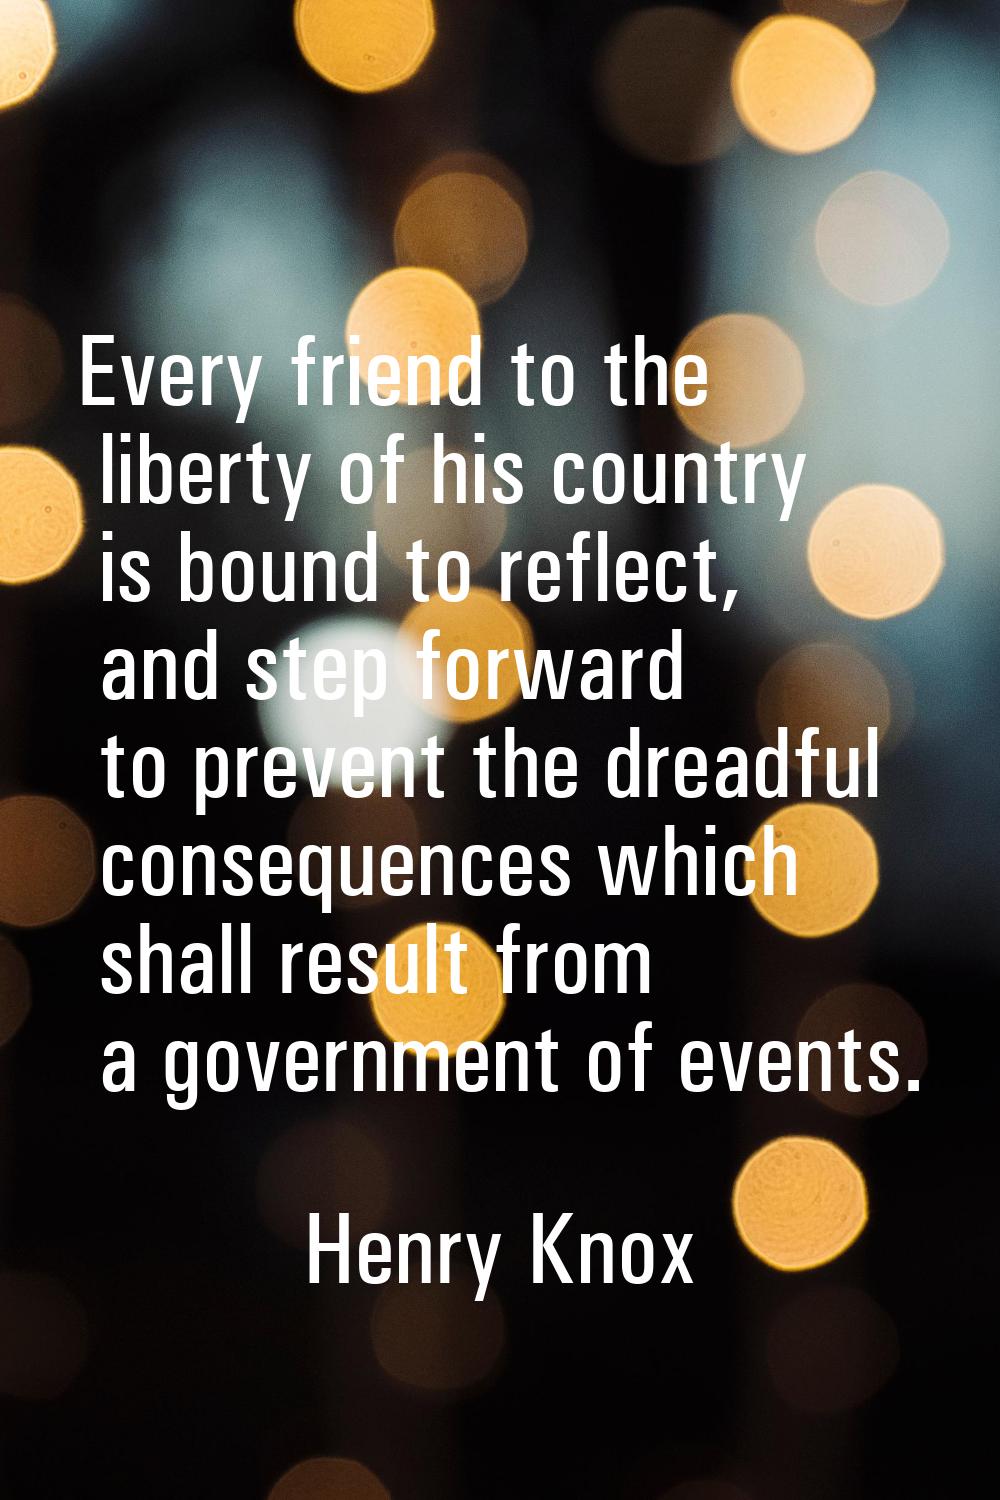 Every friend to the liberty of his country is bound to reflect, and step forward to prevent the dre